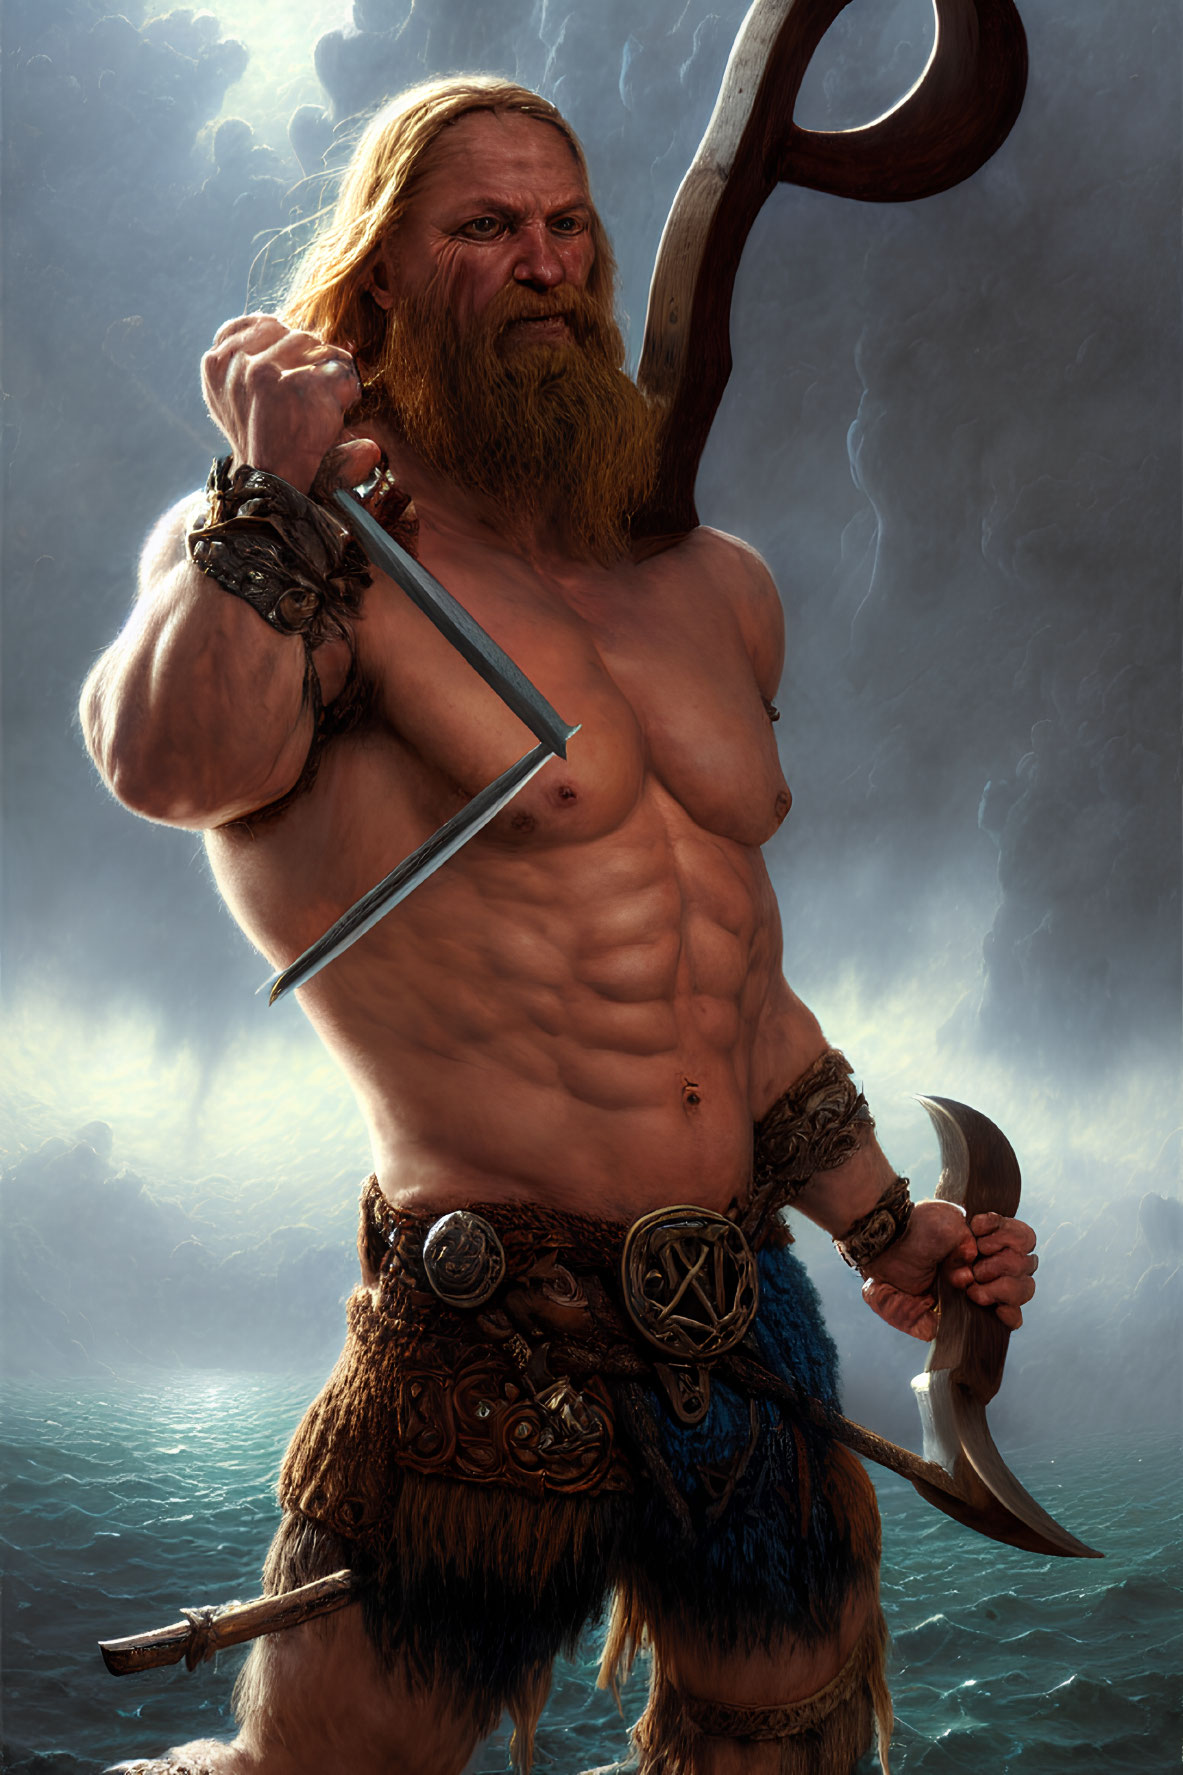 Muscular bearded fantasy warrior with axe and sword in misty backdrop